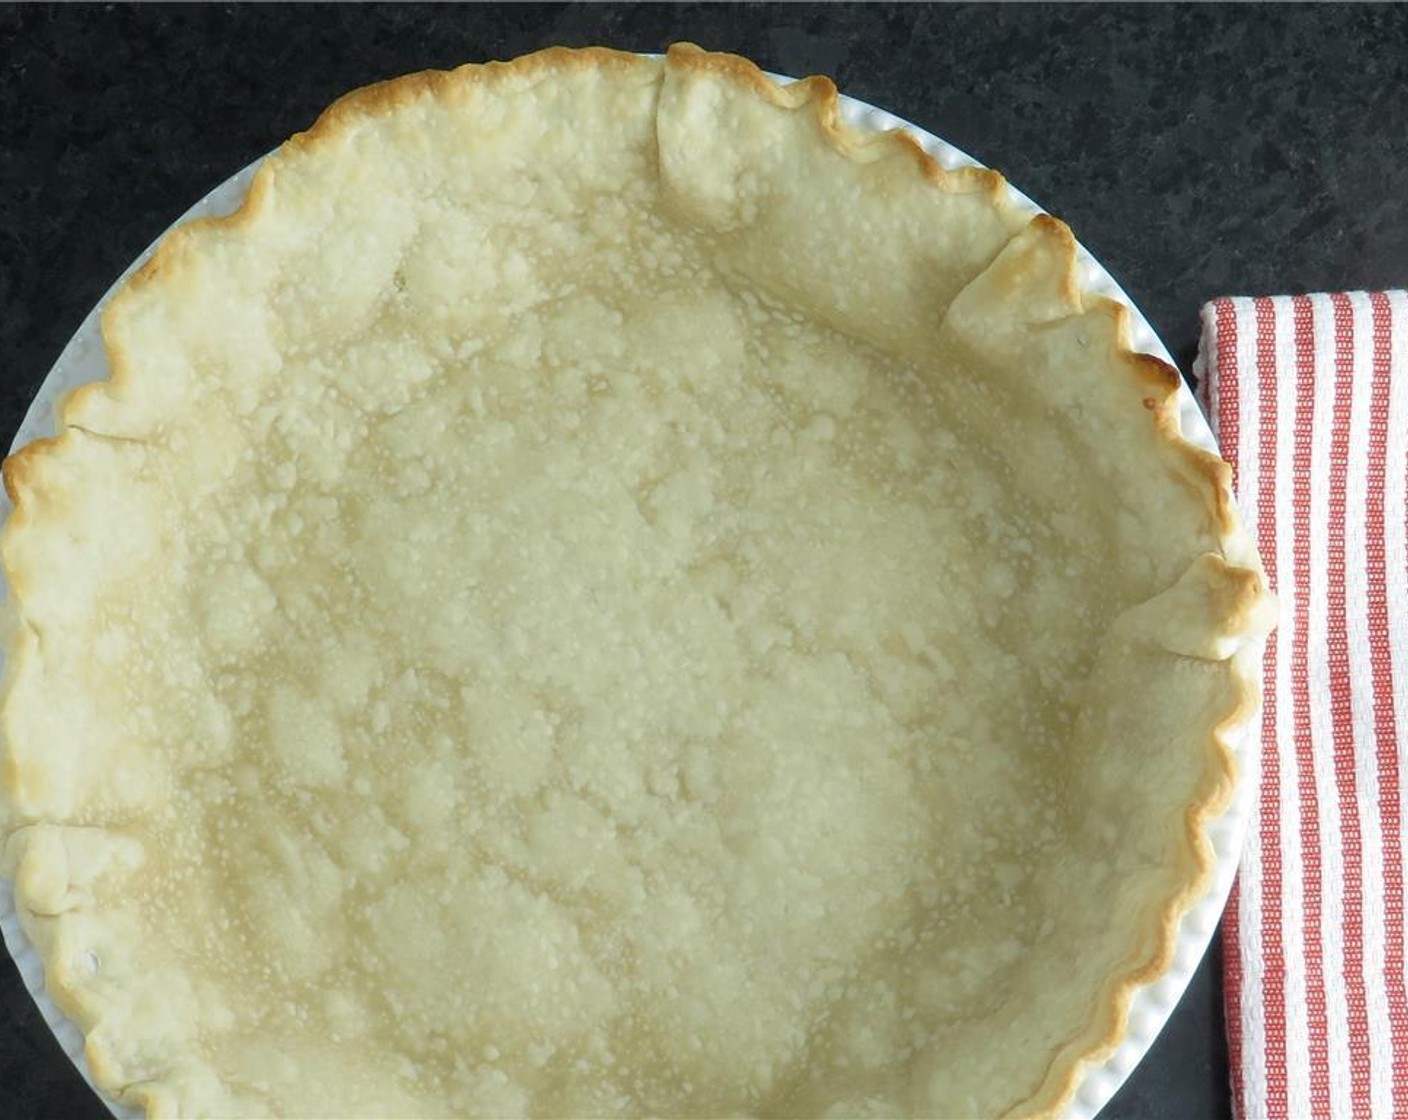 step 3 Place pie plate into the oven, and bake pie crust 6-7 minutes until set and just starting to brown. Remove crust from oven, and set aside. Reduce oven temperature to 325 degrees F (160 degrees C).